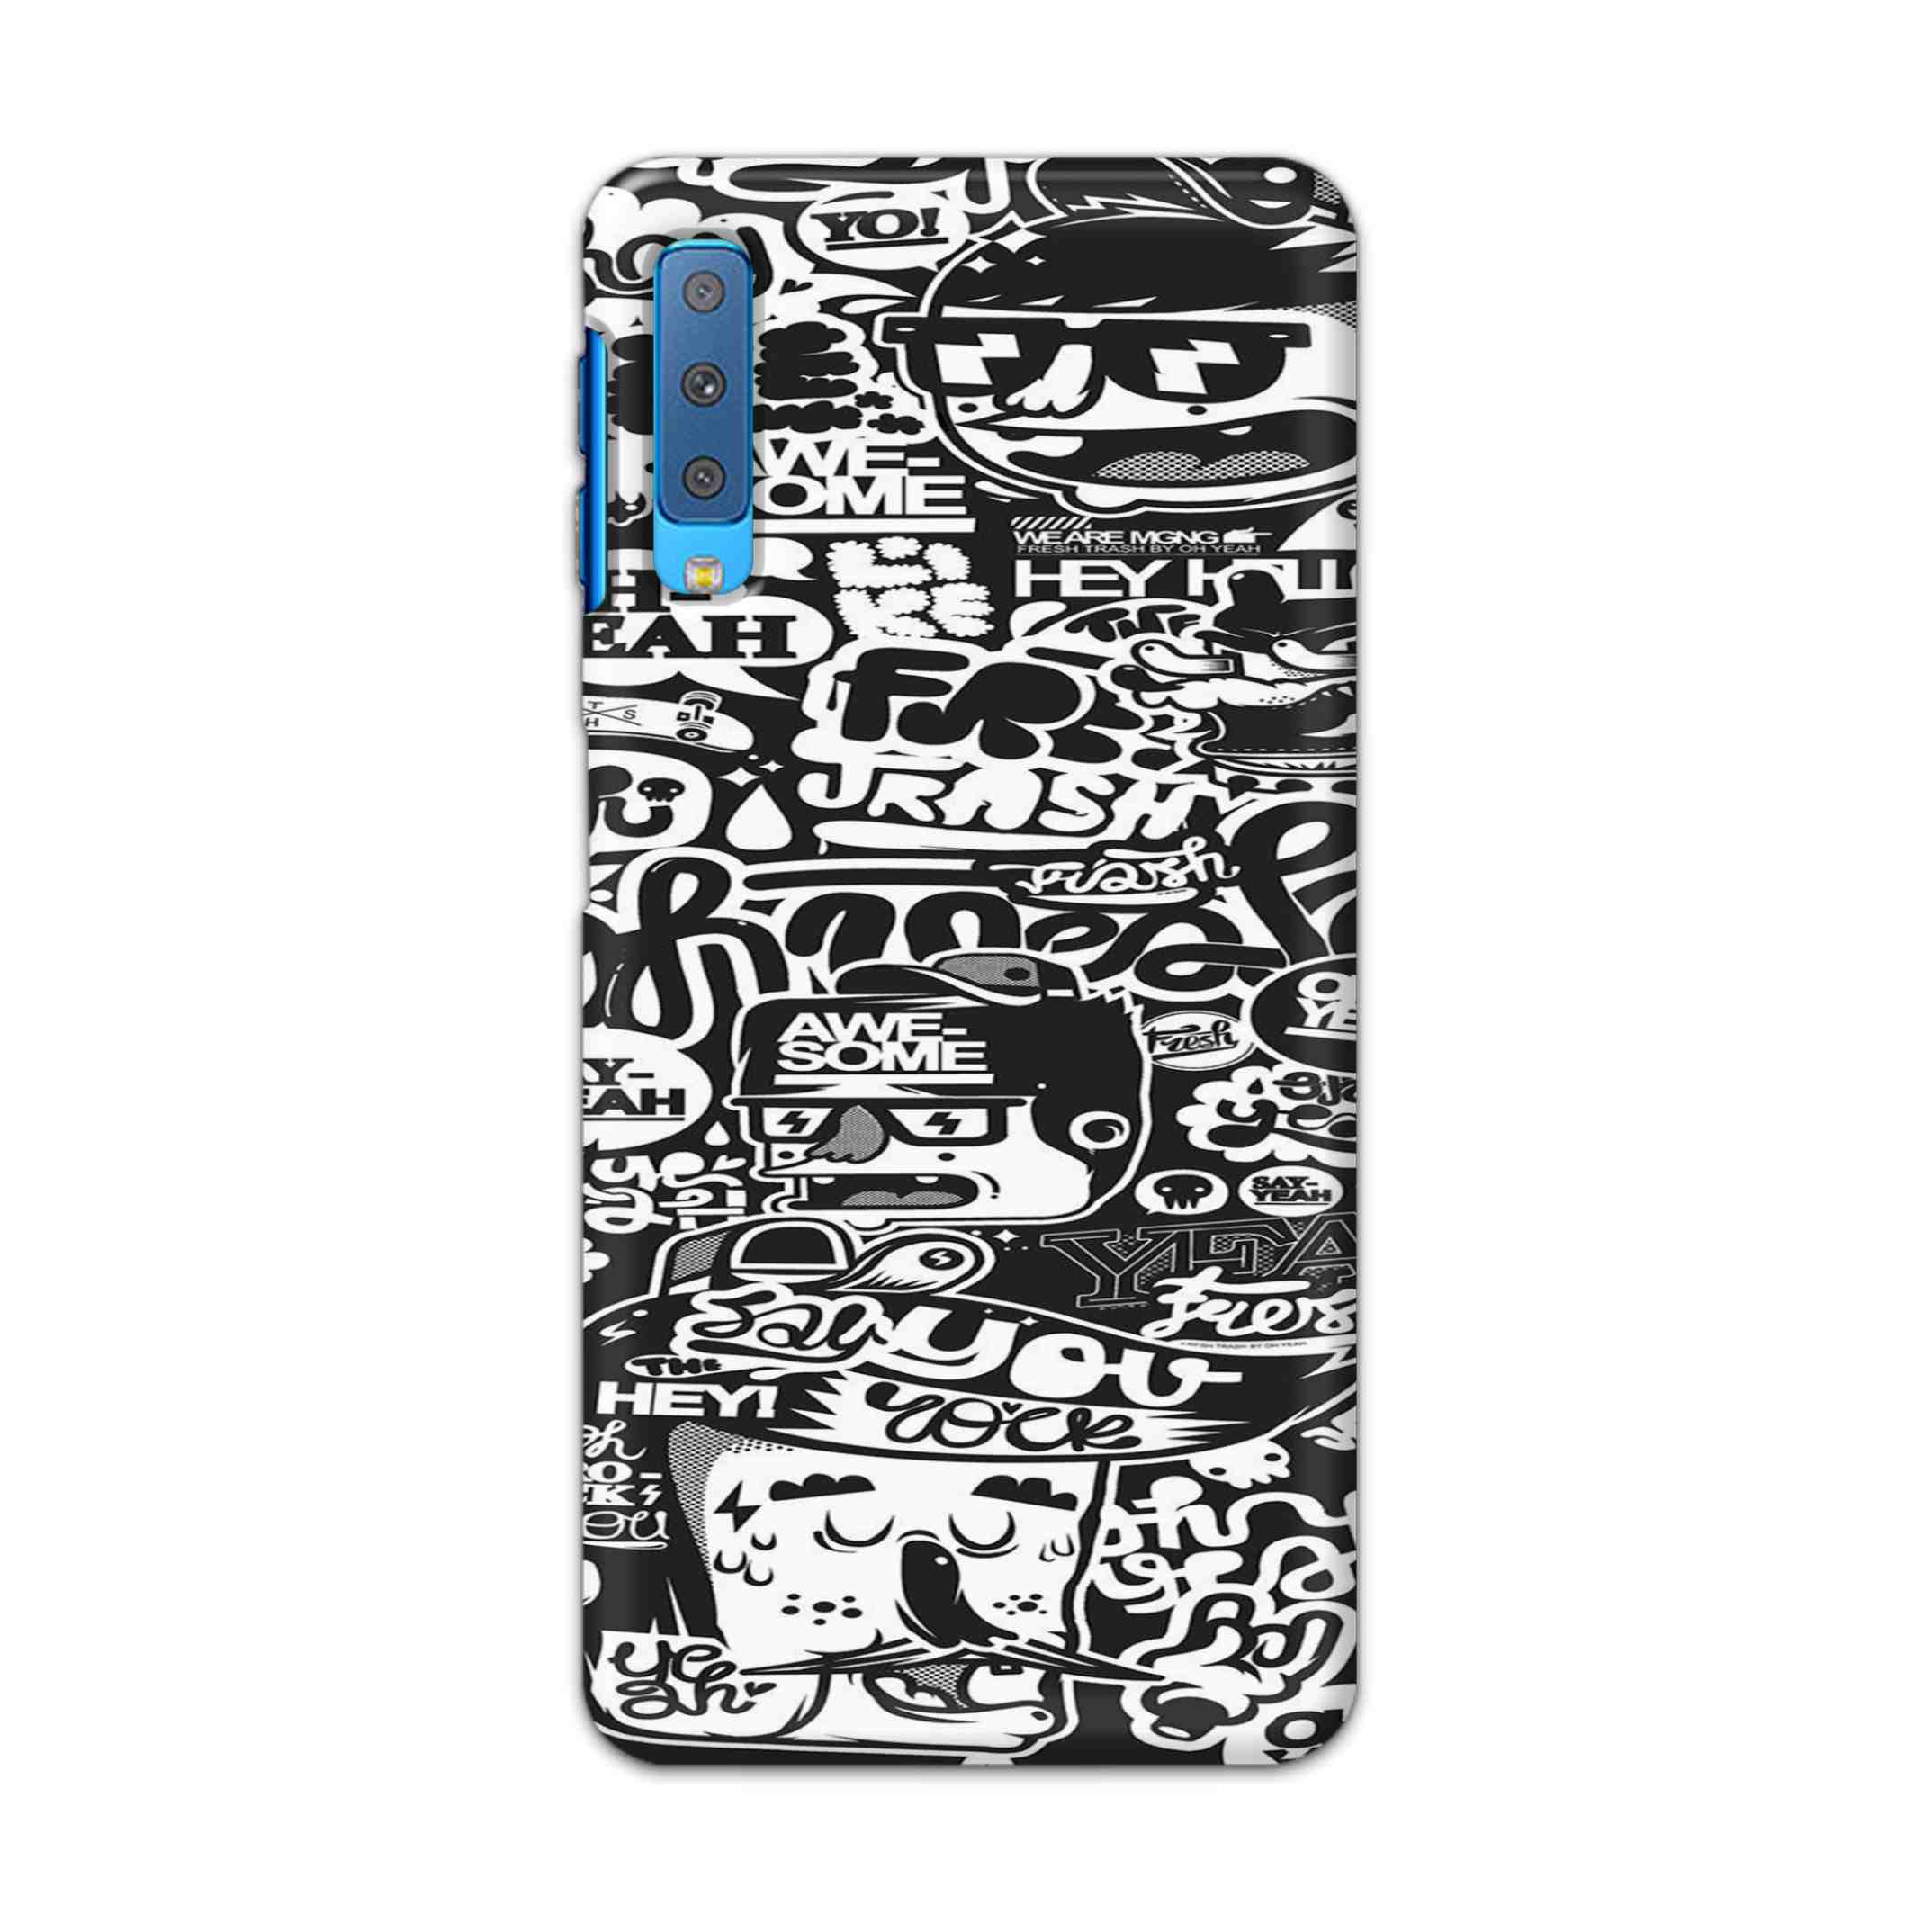 Buy Awesome Hard Back Mobile Phone Case Cover For Samsung Galaxy A7 2018 Online